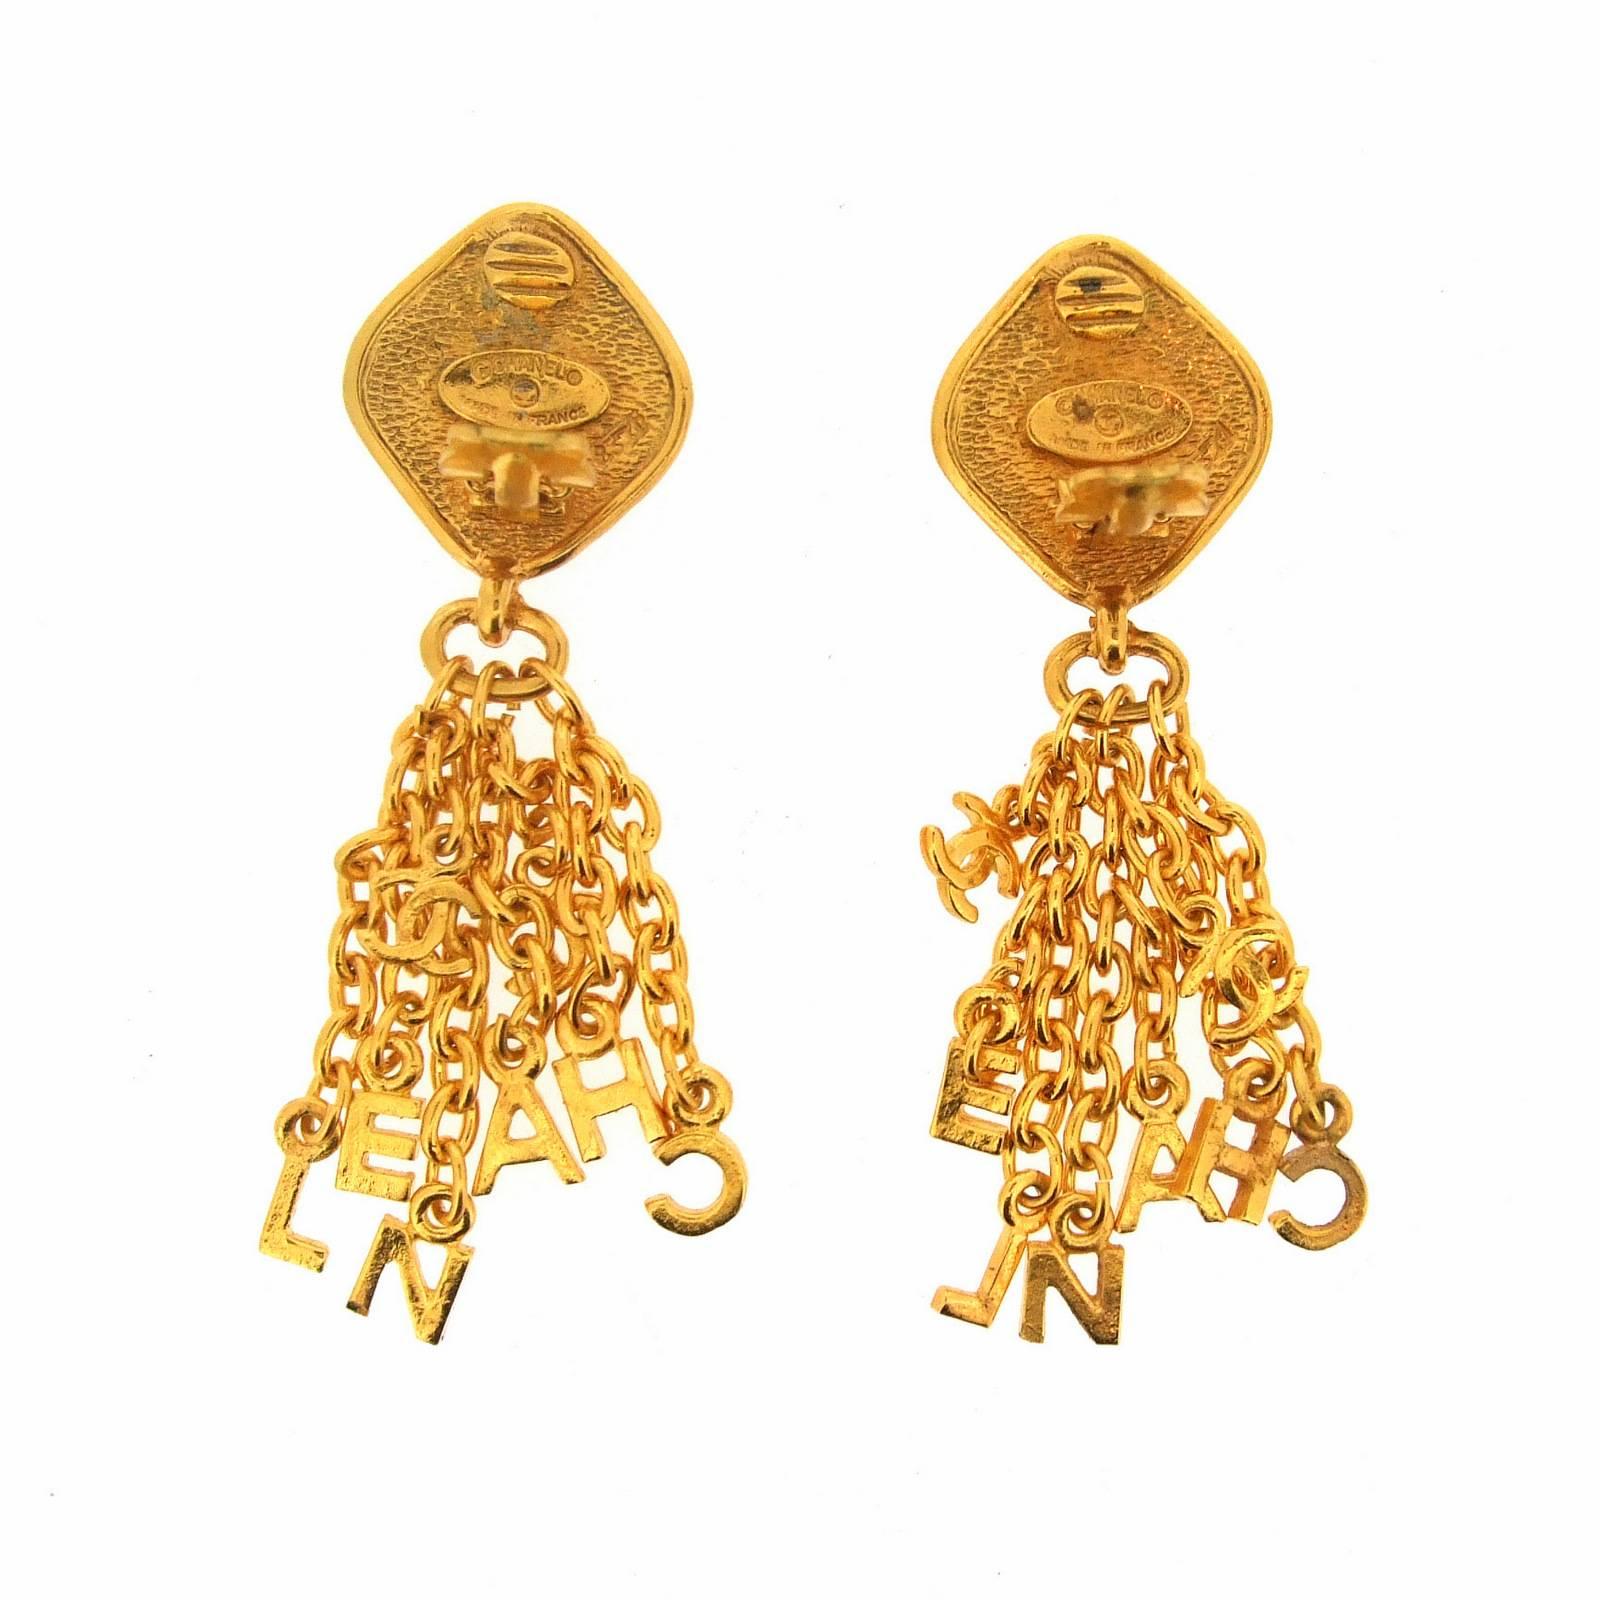 A fabulous pair of statement clip on earrings by Chanel featuring charms tassell letters spelling CHANEL with and extra cc logo charm. 

The Chanel cartouche dates to the 1980s.